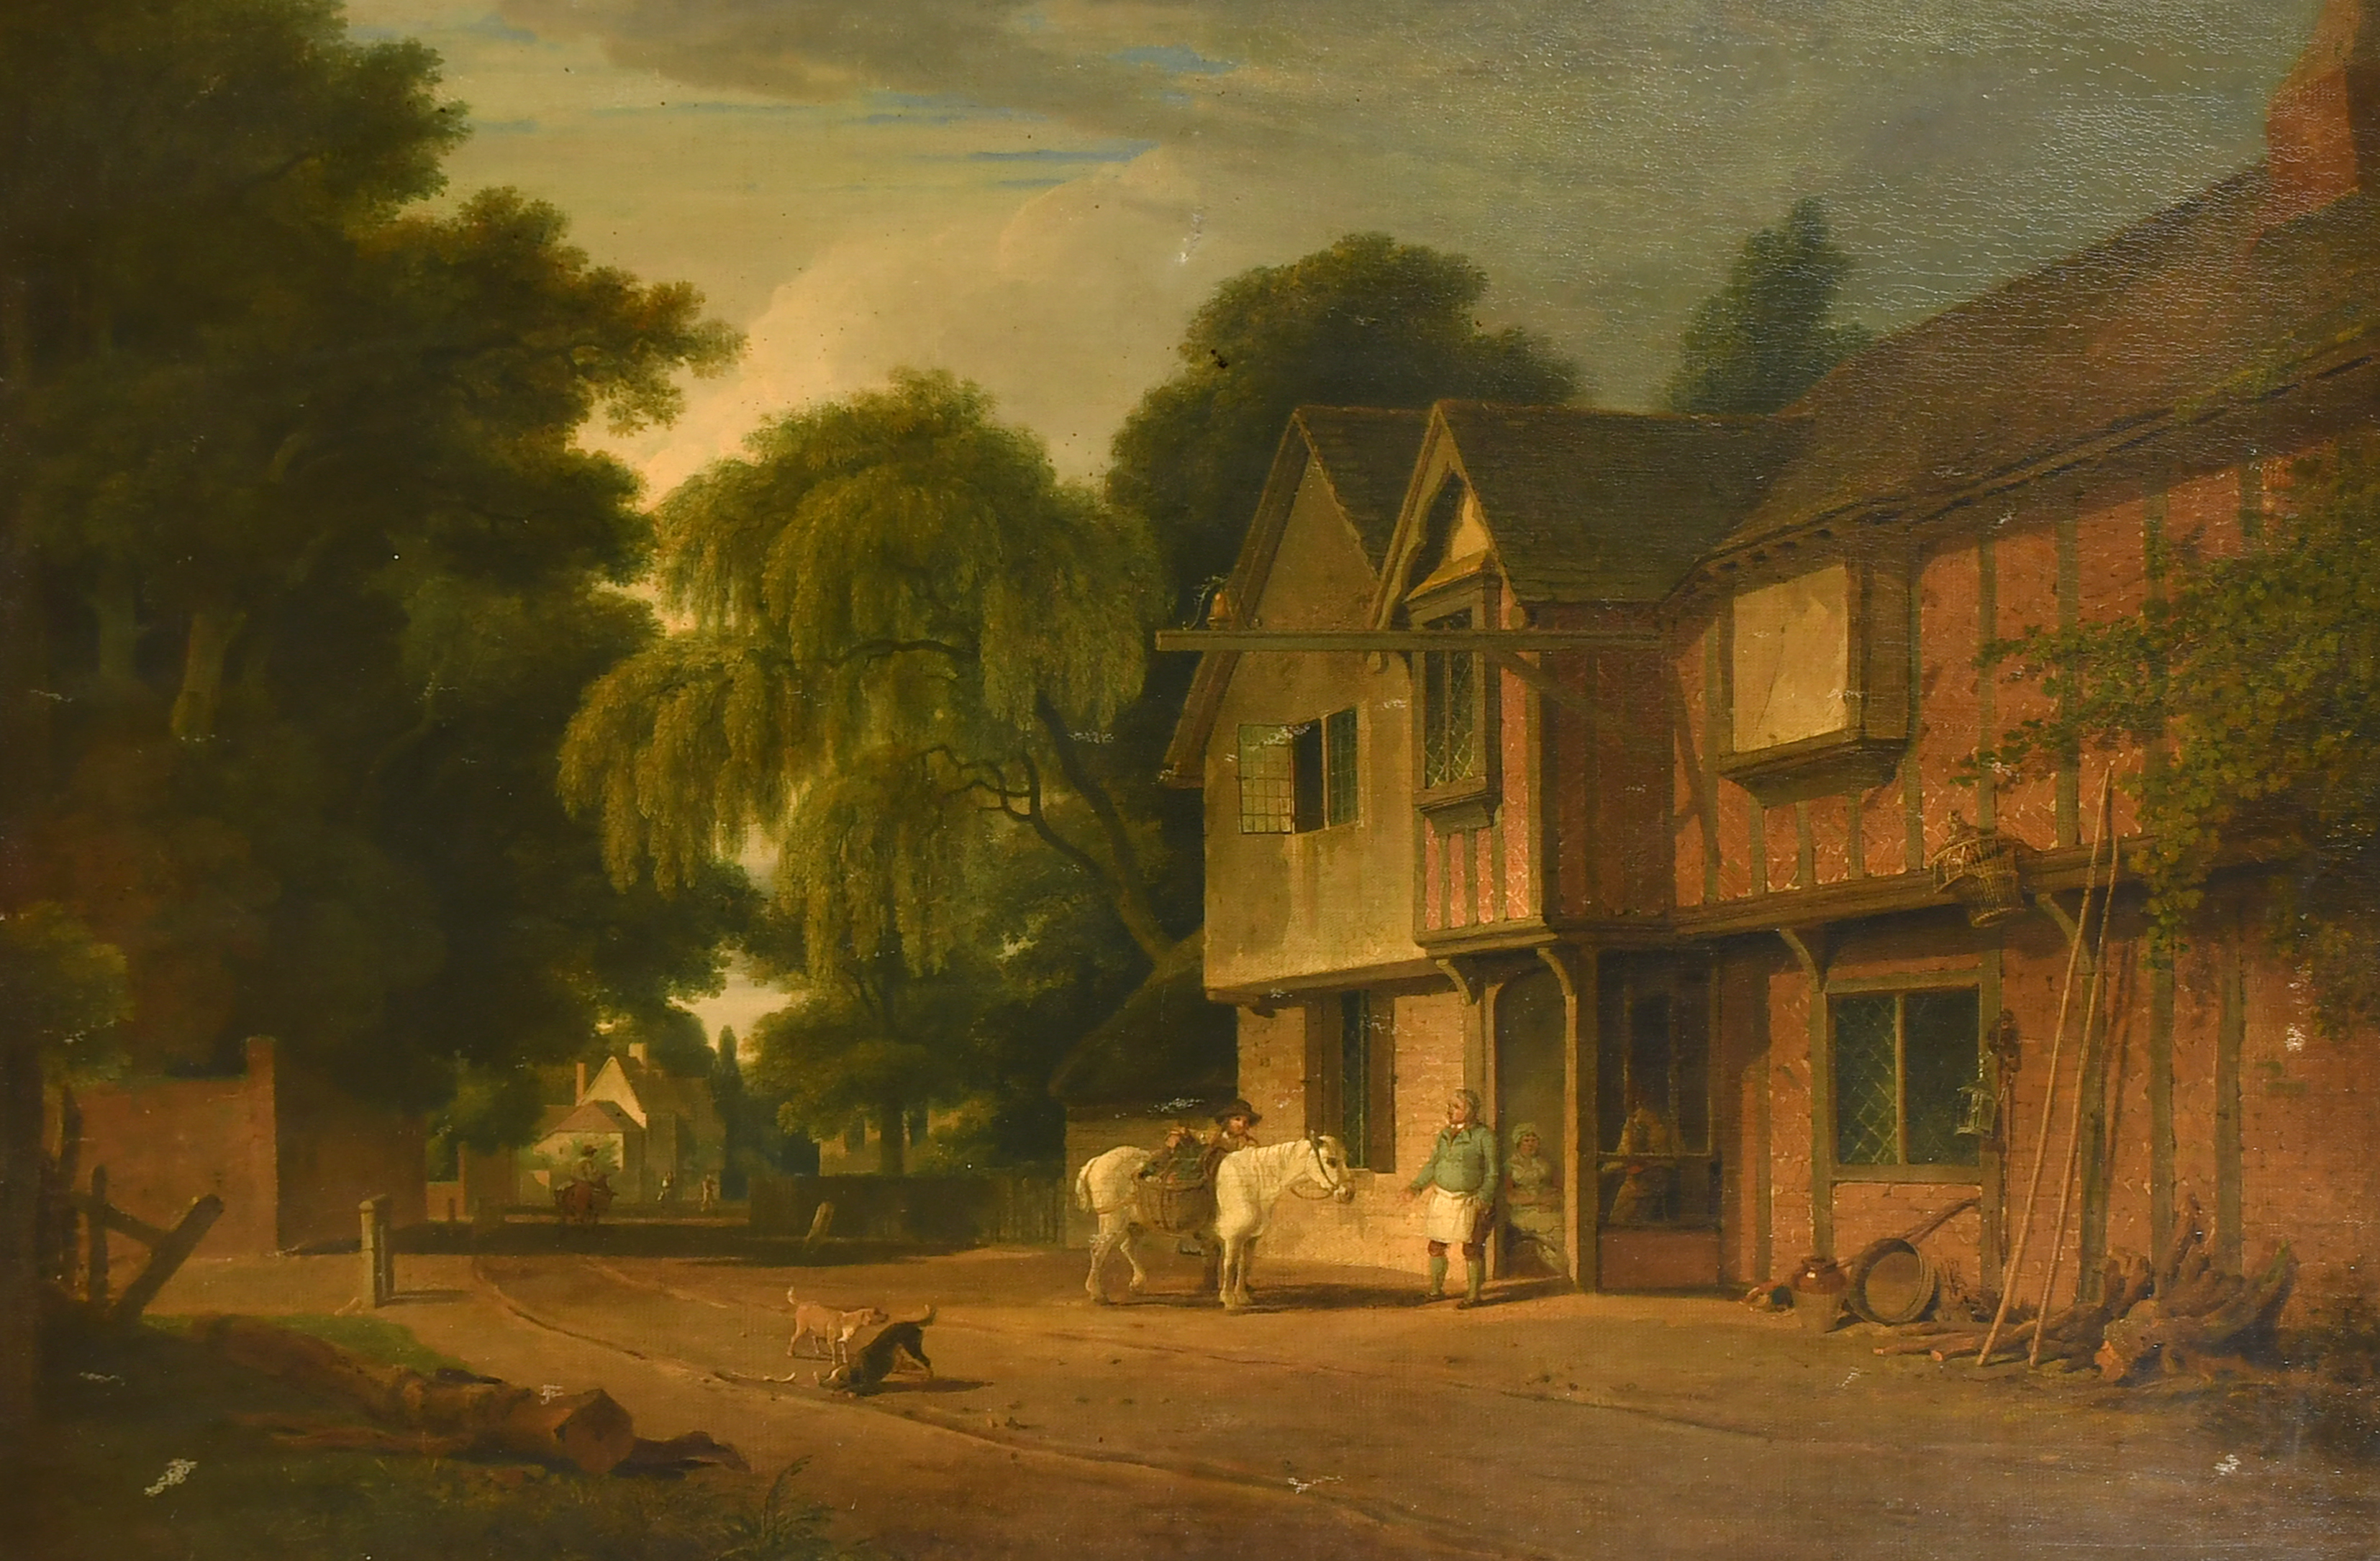 Andrew Wilson (1780-1848) British. "A View of The Bell Inn, Henley, Berks", Oil on canvas, Inscribed